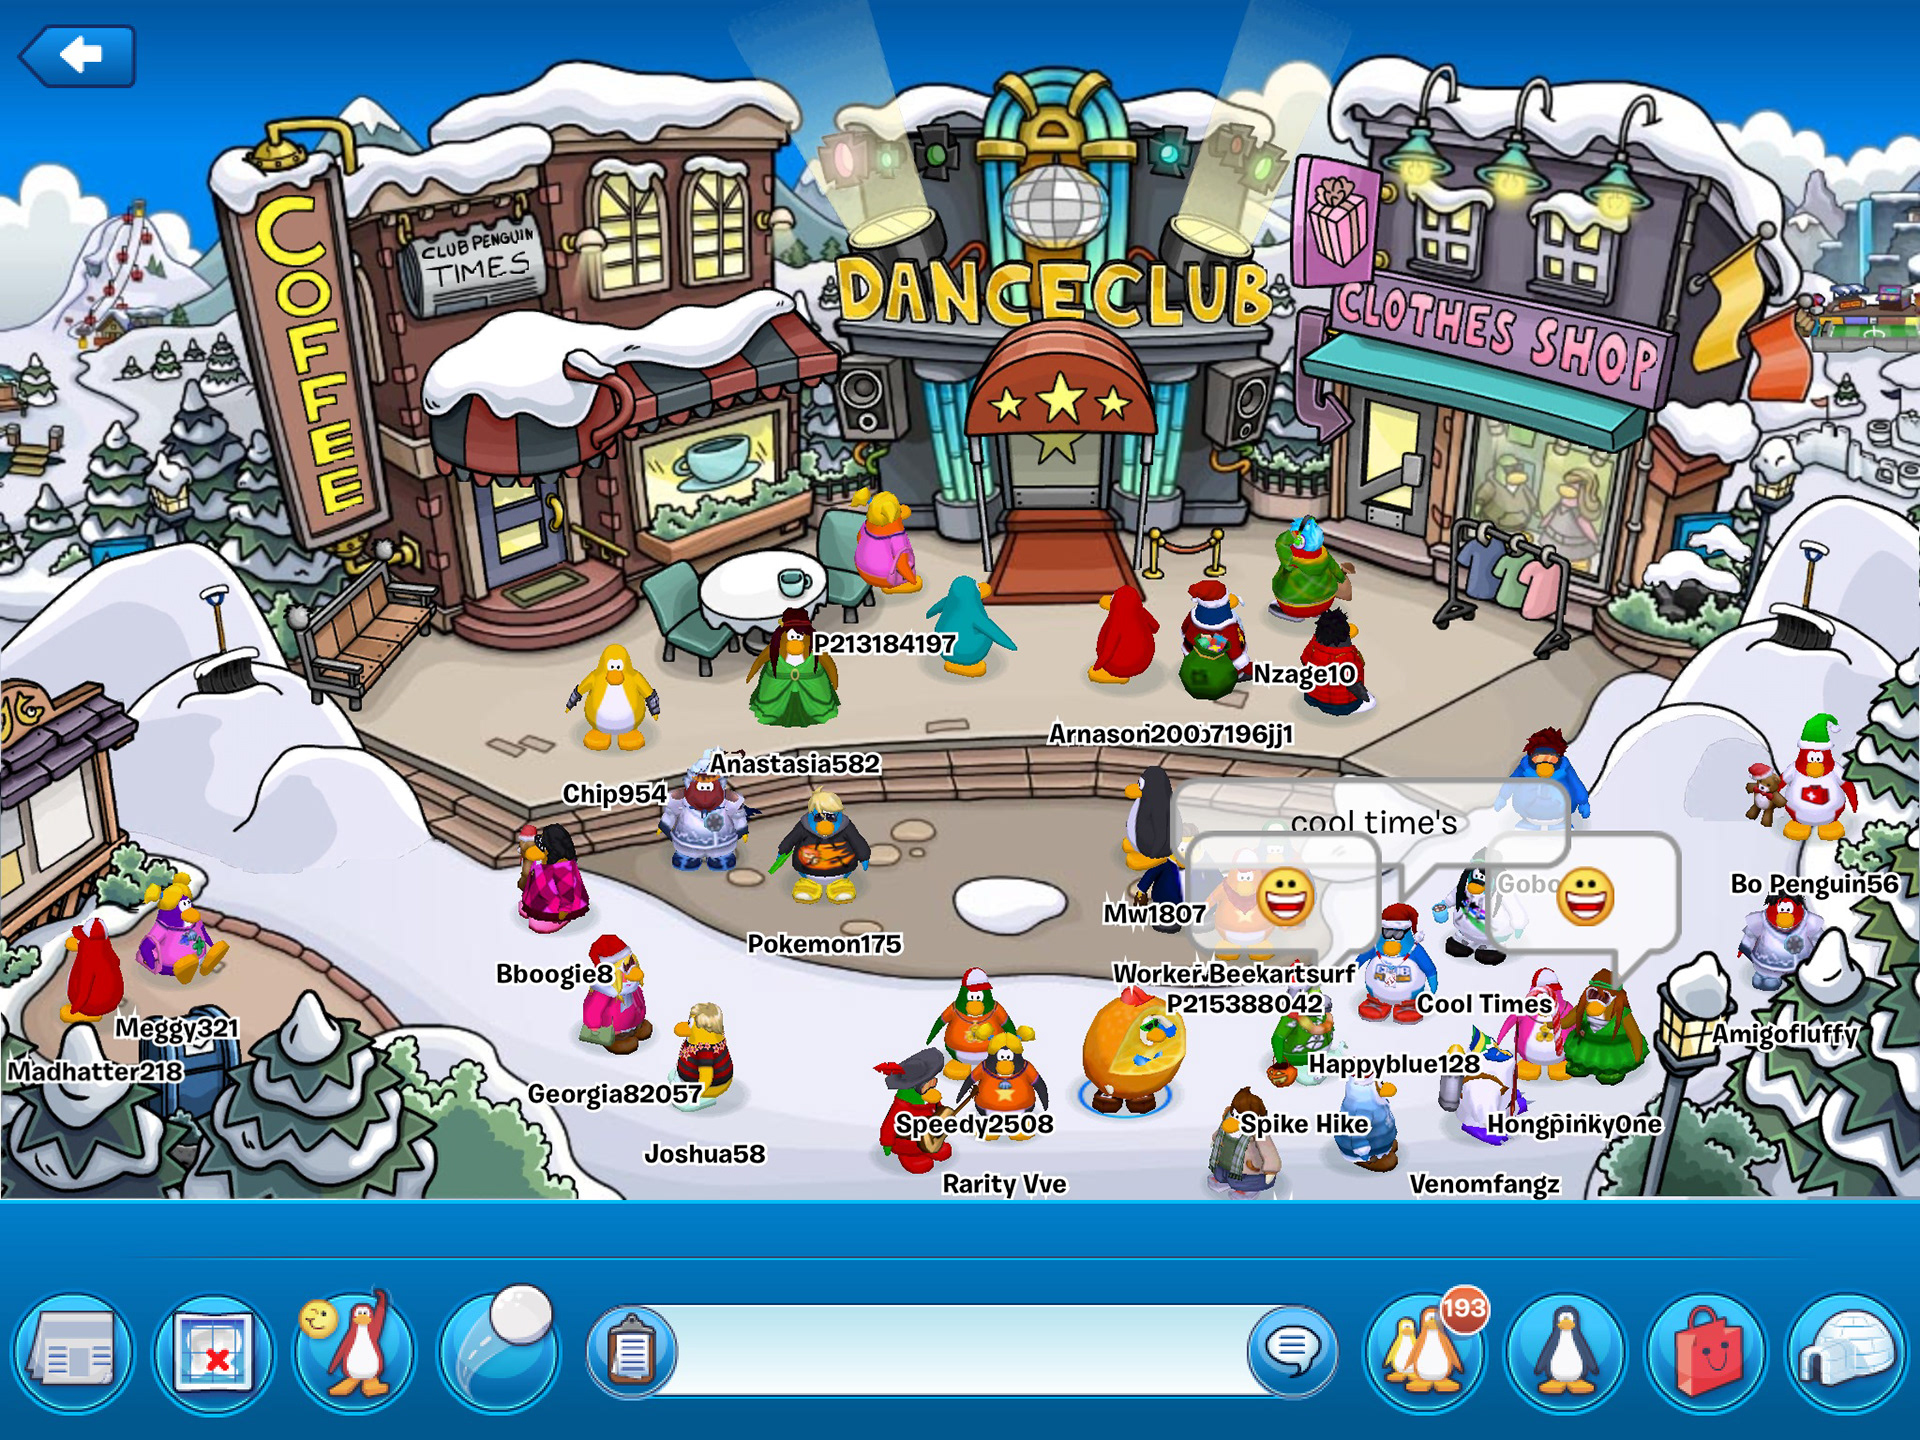 jeremy-steiner-club-penguin-ios-android-2014